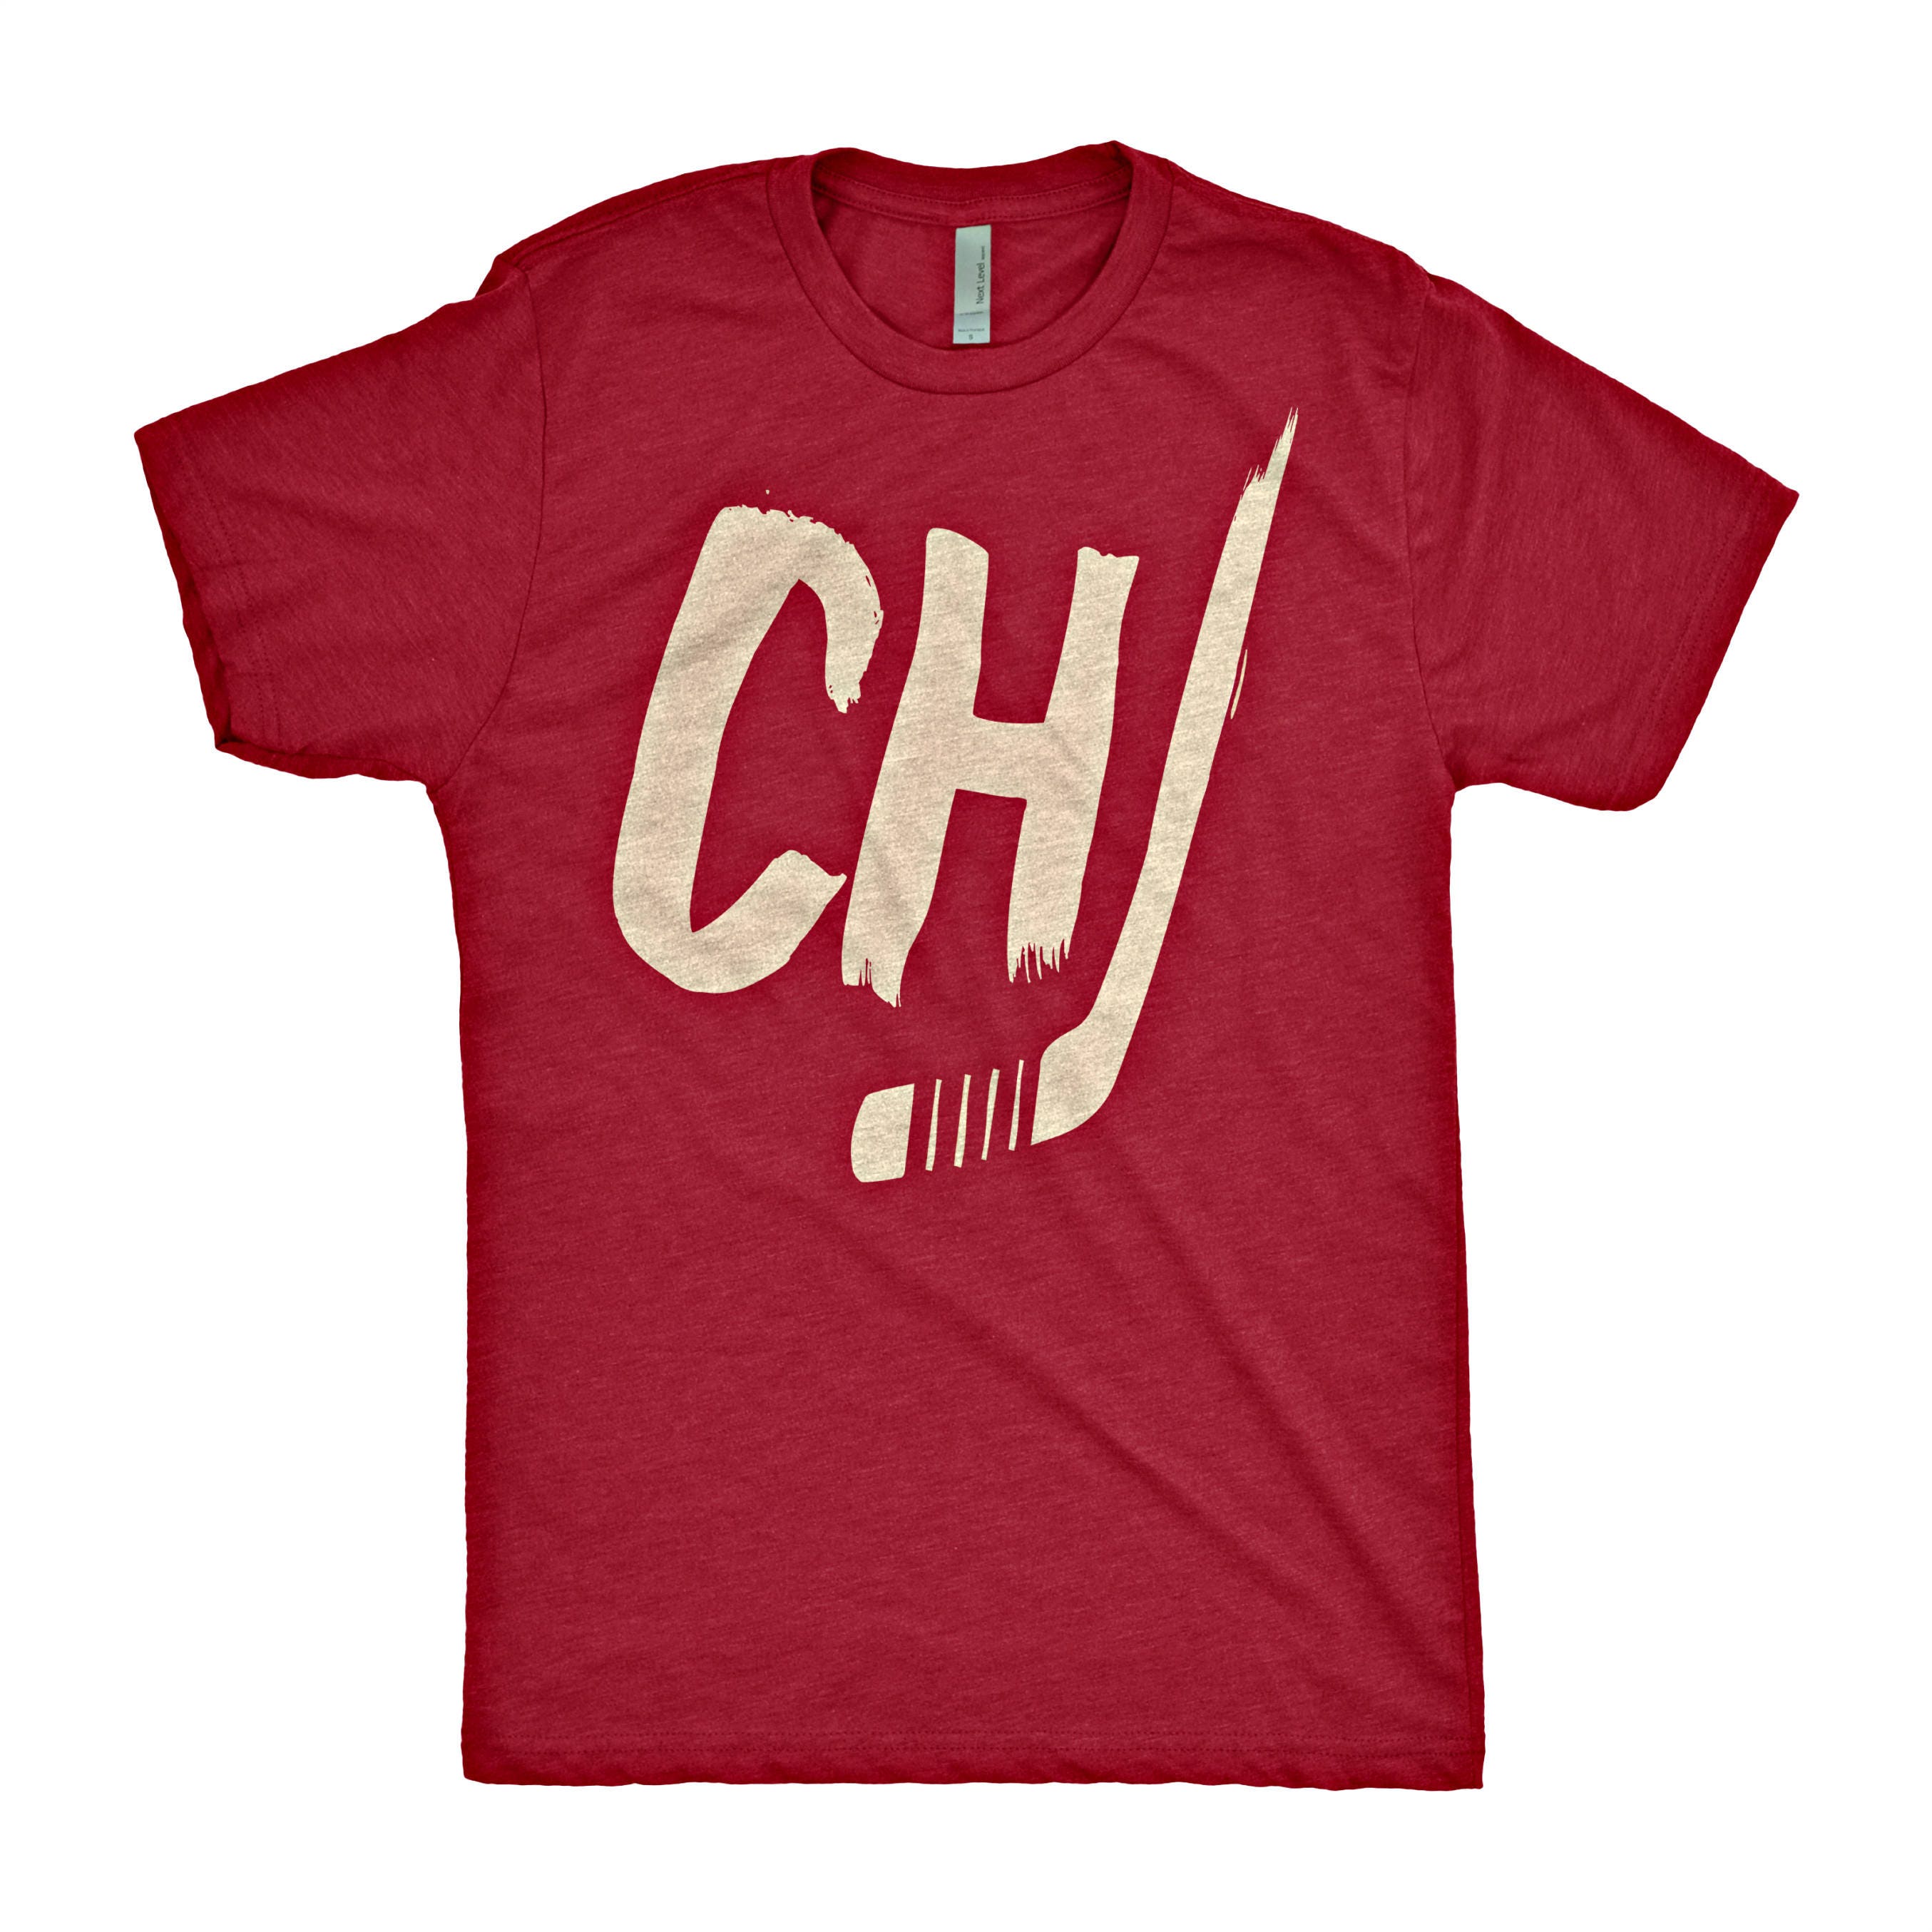 NHL Chicago BlackHawks Personalized Special Design I Pink I Can In